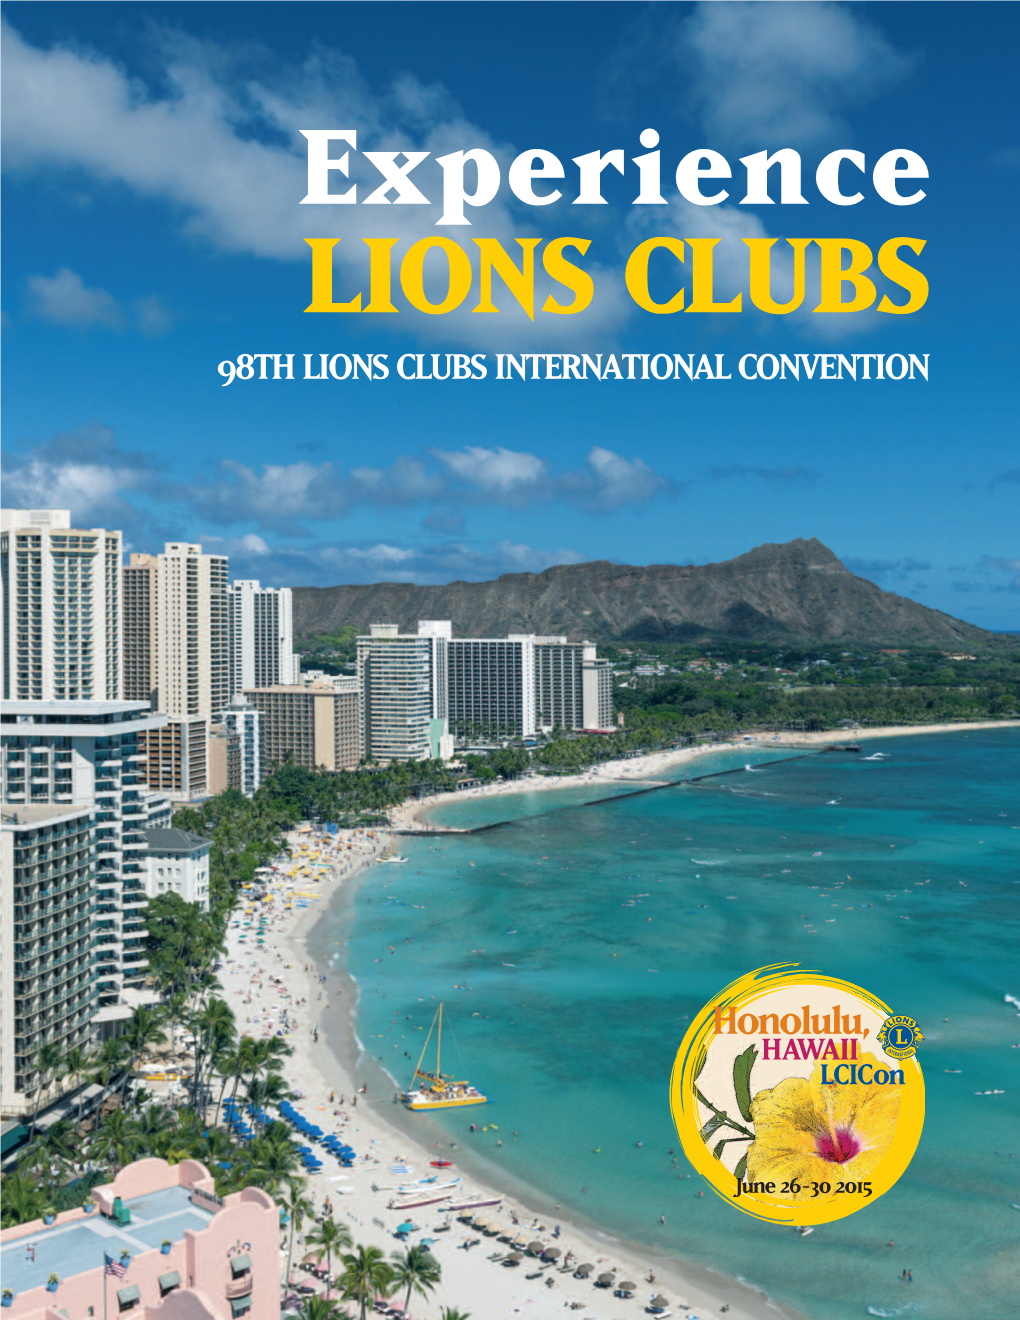 98Th Lions Clubs International Convention